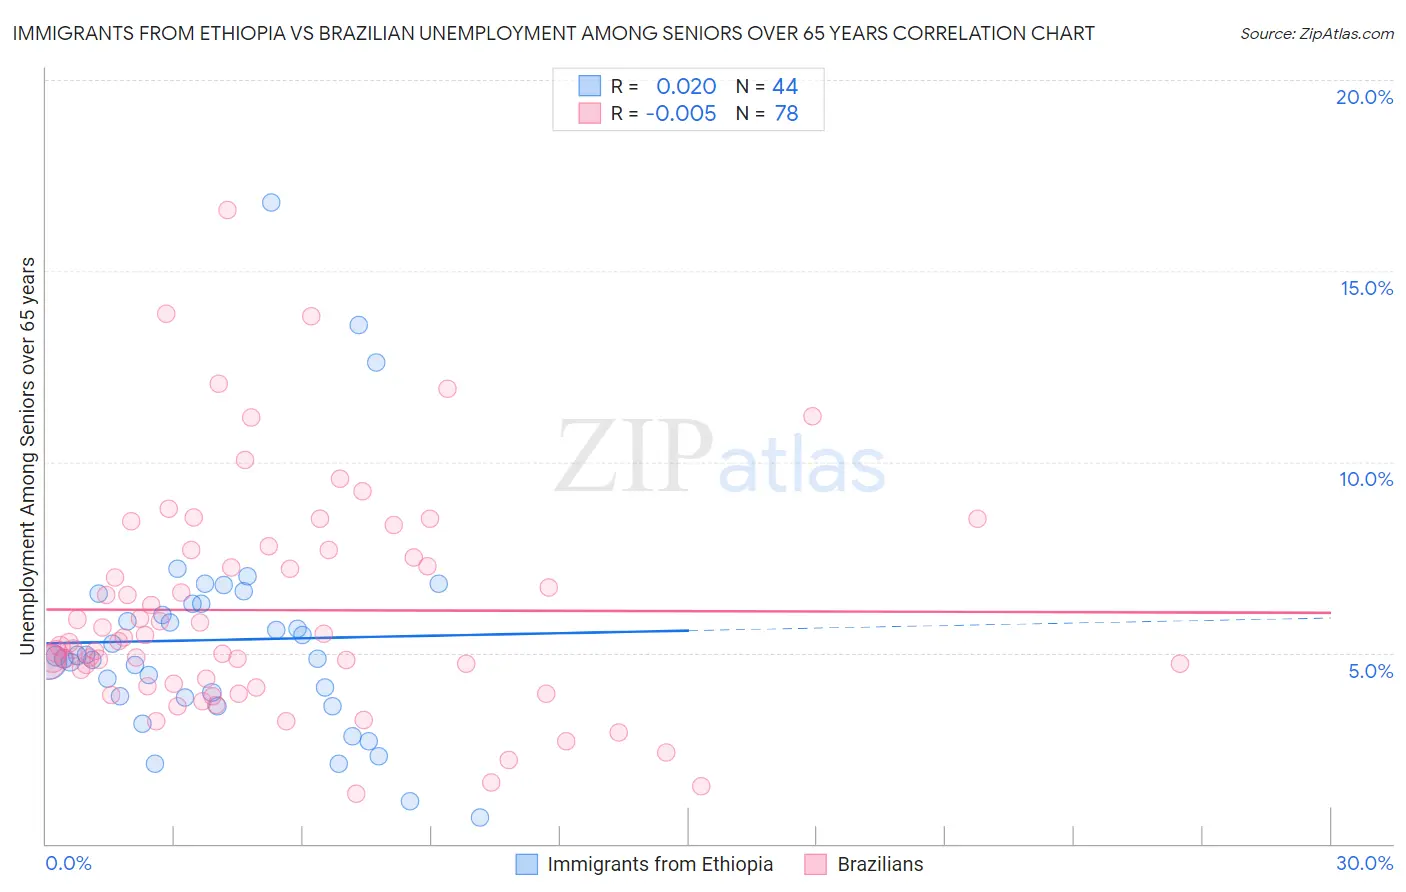 Immigrants from Ethiopia vs Brazilian Unemployment Among Seniors over 65 years